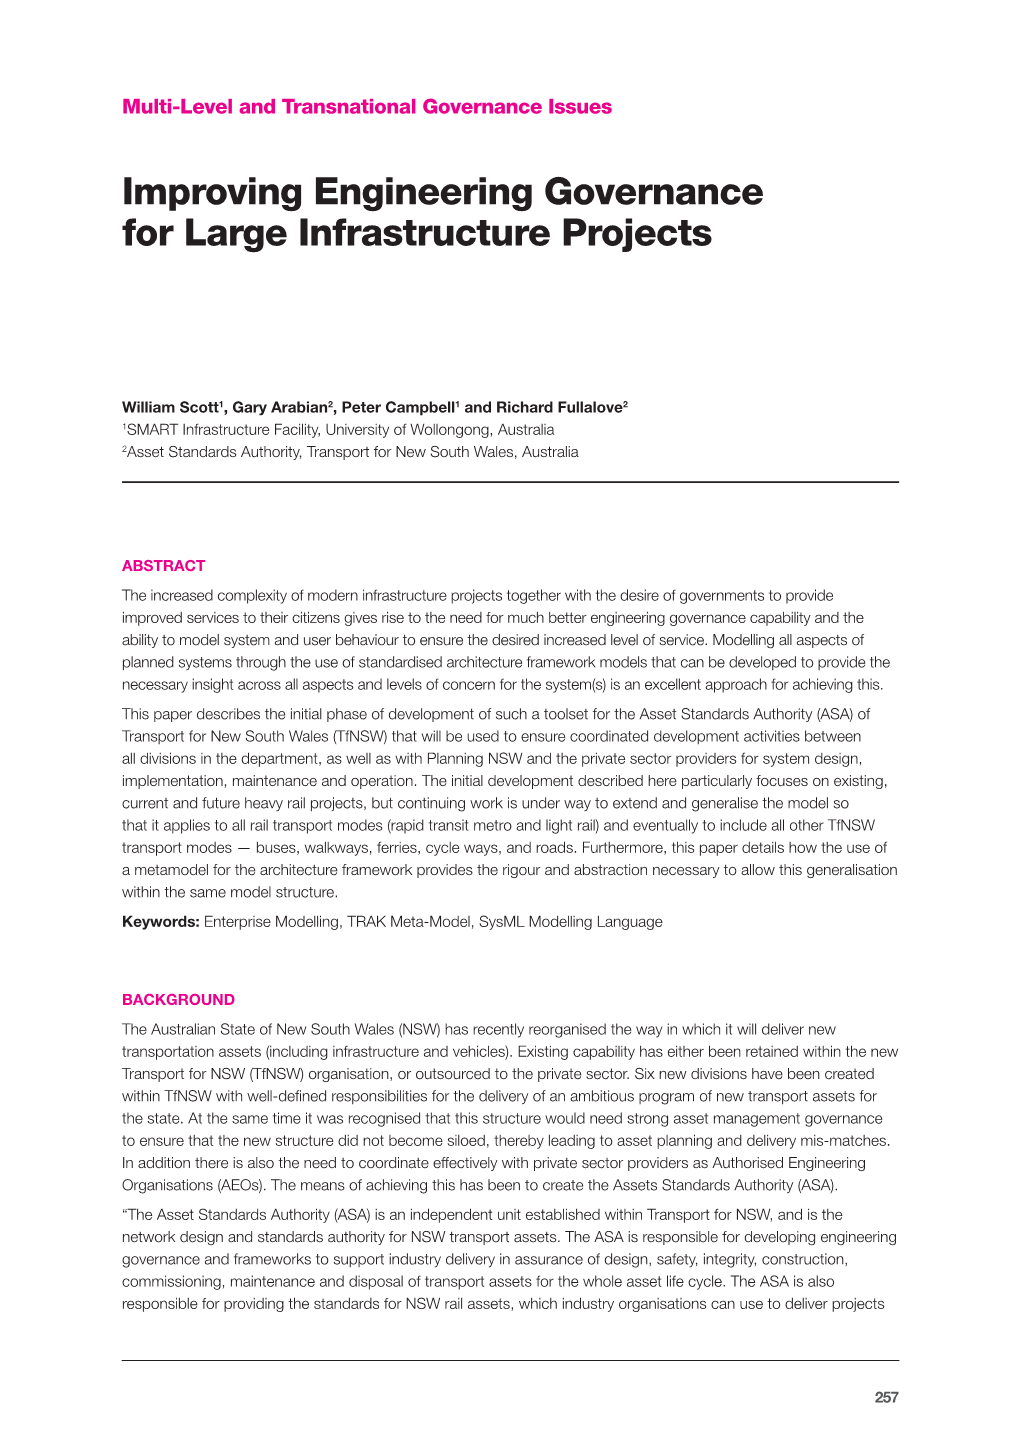 Improving Engineering Governance for Large Infrastructure Projects